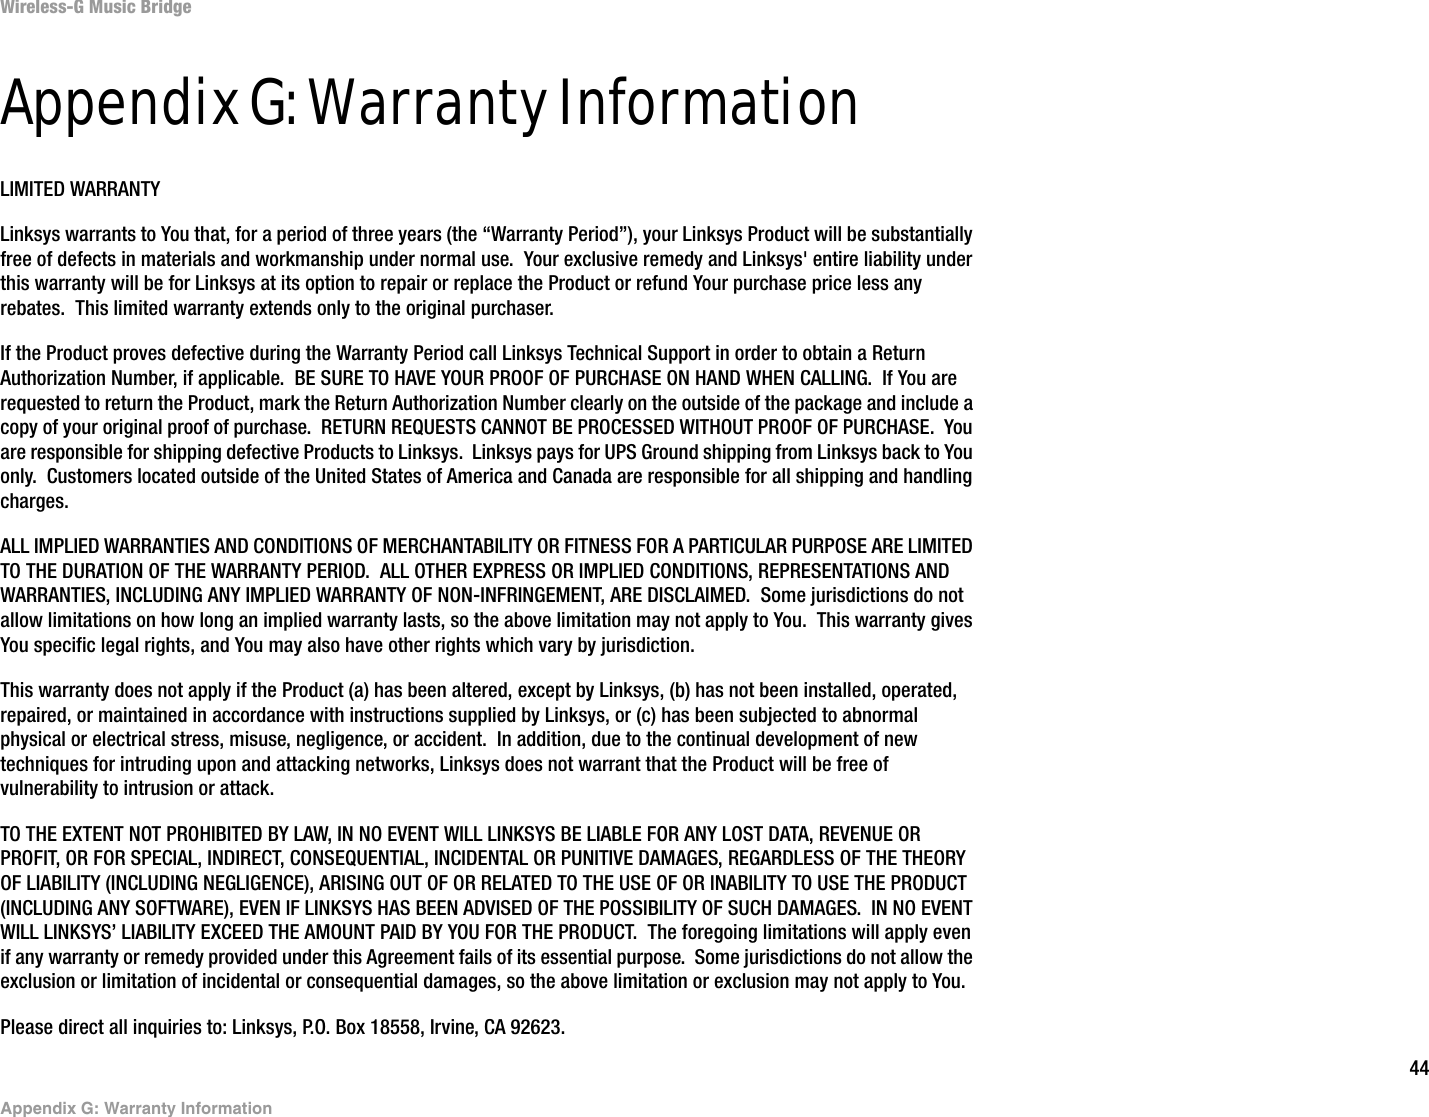 44Appendix G: Warranty InformationWireless-G Music BridgeAppendix G: Warranty InformationLIMITED WARRANTYLinksys warrants to You that, for a period of three years (the “Warranty Period”), your Linksys Product will be substantially free of defects in materials and workmanship under normal use.  Your exclusive remedy and Linksys&apos; entire liability under this warranty will be for Linksys at its option to repair or replace the Product or refund Your purchase price less any rebates.  This limited warranty extends only to the original purchaser.  If the Product proves defective during the Warranty Period call Linksys Technical Support in order to obtain a Return Authorization Number, if applicable.  BE SURE TO HAVE YOUR PROOF OF PURCHASE ON HAND WHEN CALLING.  If You are requested to return the Product, mark the Return Authorization Number clearly on the outside of the package and include a copy of your original proof of purchase.  RETURN REQUESTS CANNOT BE PROCESSED WITHOUT PROOF OF PURCHASE.  You are responsible for shipping defective Products to Linksys.  Linksys pays for UPS Ground shipping from Linksys back to You only.  Customers located outside of the United States of America and Canada are responsible for all shipping and handling charges. ALL IMPLIED WARRANTIES AND CONDITIONS OF MERCHANTABILITY OR FITNESS FOR A PARTICULAR PURPOSE ARE LIMITED TO THE DURATION OF THE WARRANTY PERIOD.  ALL OTHER EXPRESS OR IMPLIED CONDITIONS, REPRESENTATIONS AND WARRANTIES, INCLUDING ANY IMPLIED WARRANTY OF NON-INFRINGEMENT, ARE DISCLAIMED.  Some jurisdictions do not allow limitations on how long an implied warranty lasts, so the above limitation may not apply to You.  This warranty gives You specific legal rights, and You may also have other rights which vary by jurisdiction.This warranty does not apply if the Product (a) has been altered, except by Linksys, (b) has not been installed, operated, repaired, or maintained in accordance with instructions supplied by Linksys, or (c) has been subjected to abnormal physical or electrical stress, misuse, negligence, or accident.  In addition, due to the continual development of new techniques for intruding upon and attacking networks, Linksys does not warrant that the Product will be free of vulnerability to intrusion or attack.TO THE EXTENT NOT PROHIBITED BY LAW, IN NO EVENT WILL LINKSYS BE LIABLE FOR ANY LOST DATA, REVENUE OR PROFIT, OR FOR SPECIAL, INDIRECT, CONSEQUENTIAL, INCIDENTAL OR PUNITIVE DAMAGES, REGARDLESS OF THE THEORY OF LIABILITY (INCLUDING NEGLIGENCE), ARISING OUT OF OR RELATED TO THE USE OF OR INABILITY TO USE THE PRODUCT (INCLUDING ANY SOFTWARE), EVEN IF LINKSYS HAS BEEN ADVISED OF THE POSSIBILITY OF SUCH DAMAGES.  IN NO EVENT WILL LINKSYS’ LIABILITY EXCEED THE AMOUNT PAID BY YOU FOR THE PRODUCT.  The foregoing limitations will apply even if any warranty or remedy provided under this Agreement fails of its essential purpose.  Some jurisdictions do not allow the exclusion or limitation of incidental or consequential damages, so the above limitation or exclusion may not apply to You.Please direct all inquiries to: Linksys, P.O. Box 18558, Irvine, CA 92623.